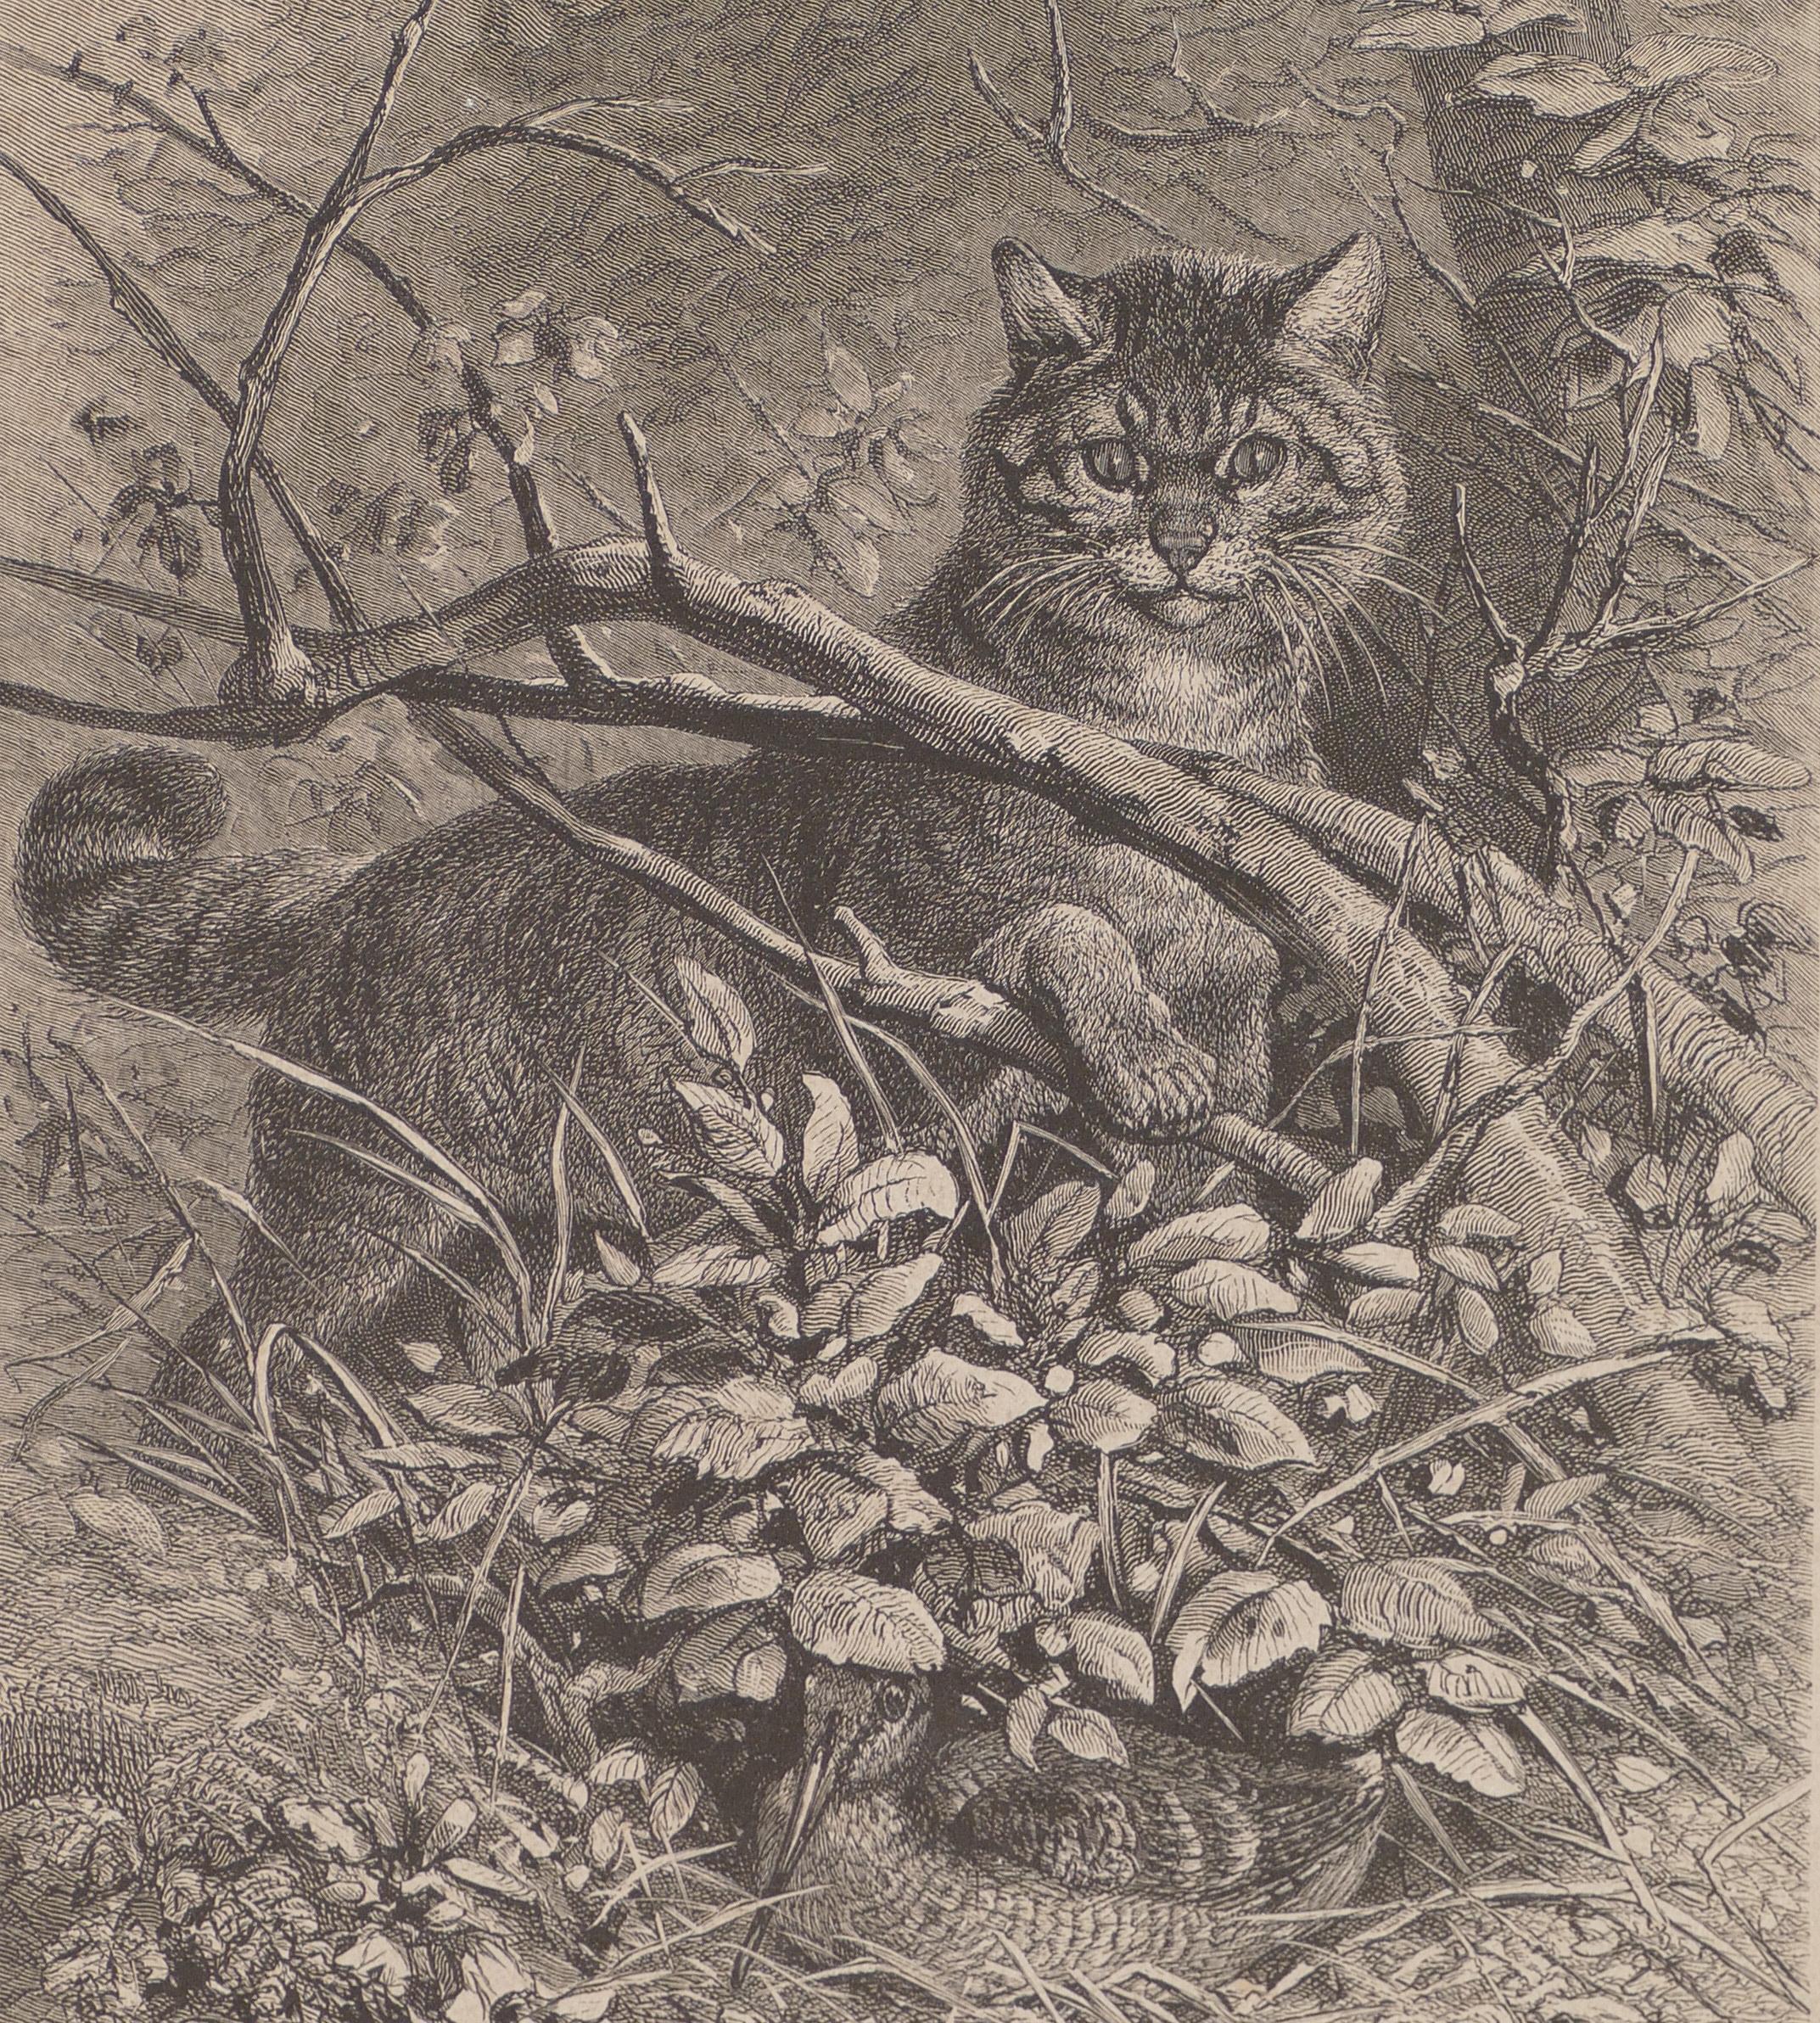 A Cat Hidden in the Tree - Original Lithograph - 1880 - Print by Unknown